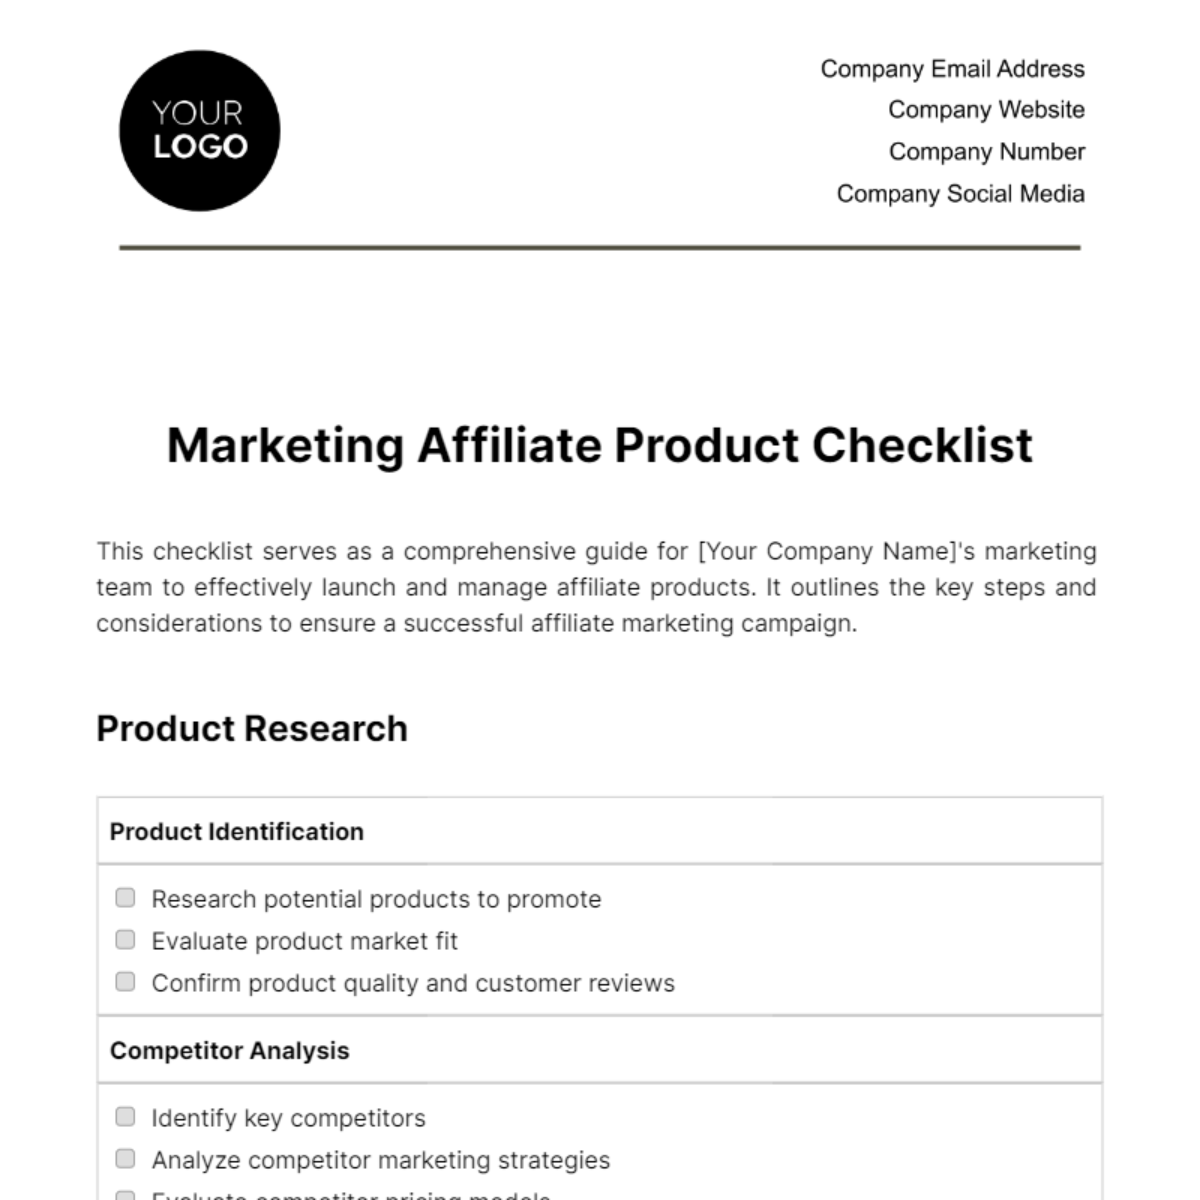 Free Marketing Affiliate Product Checklist Template